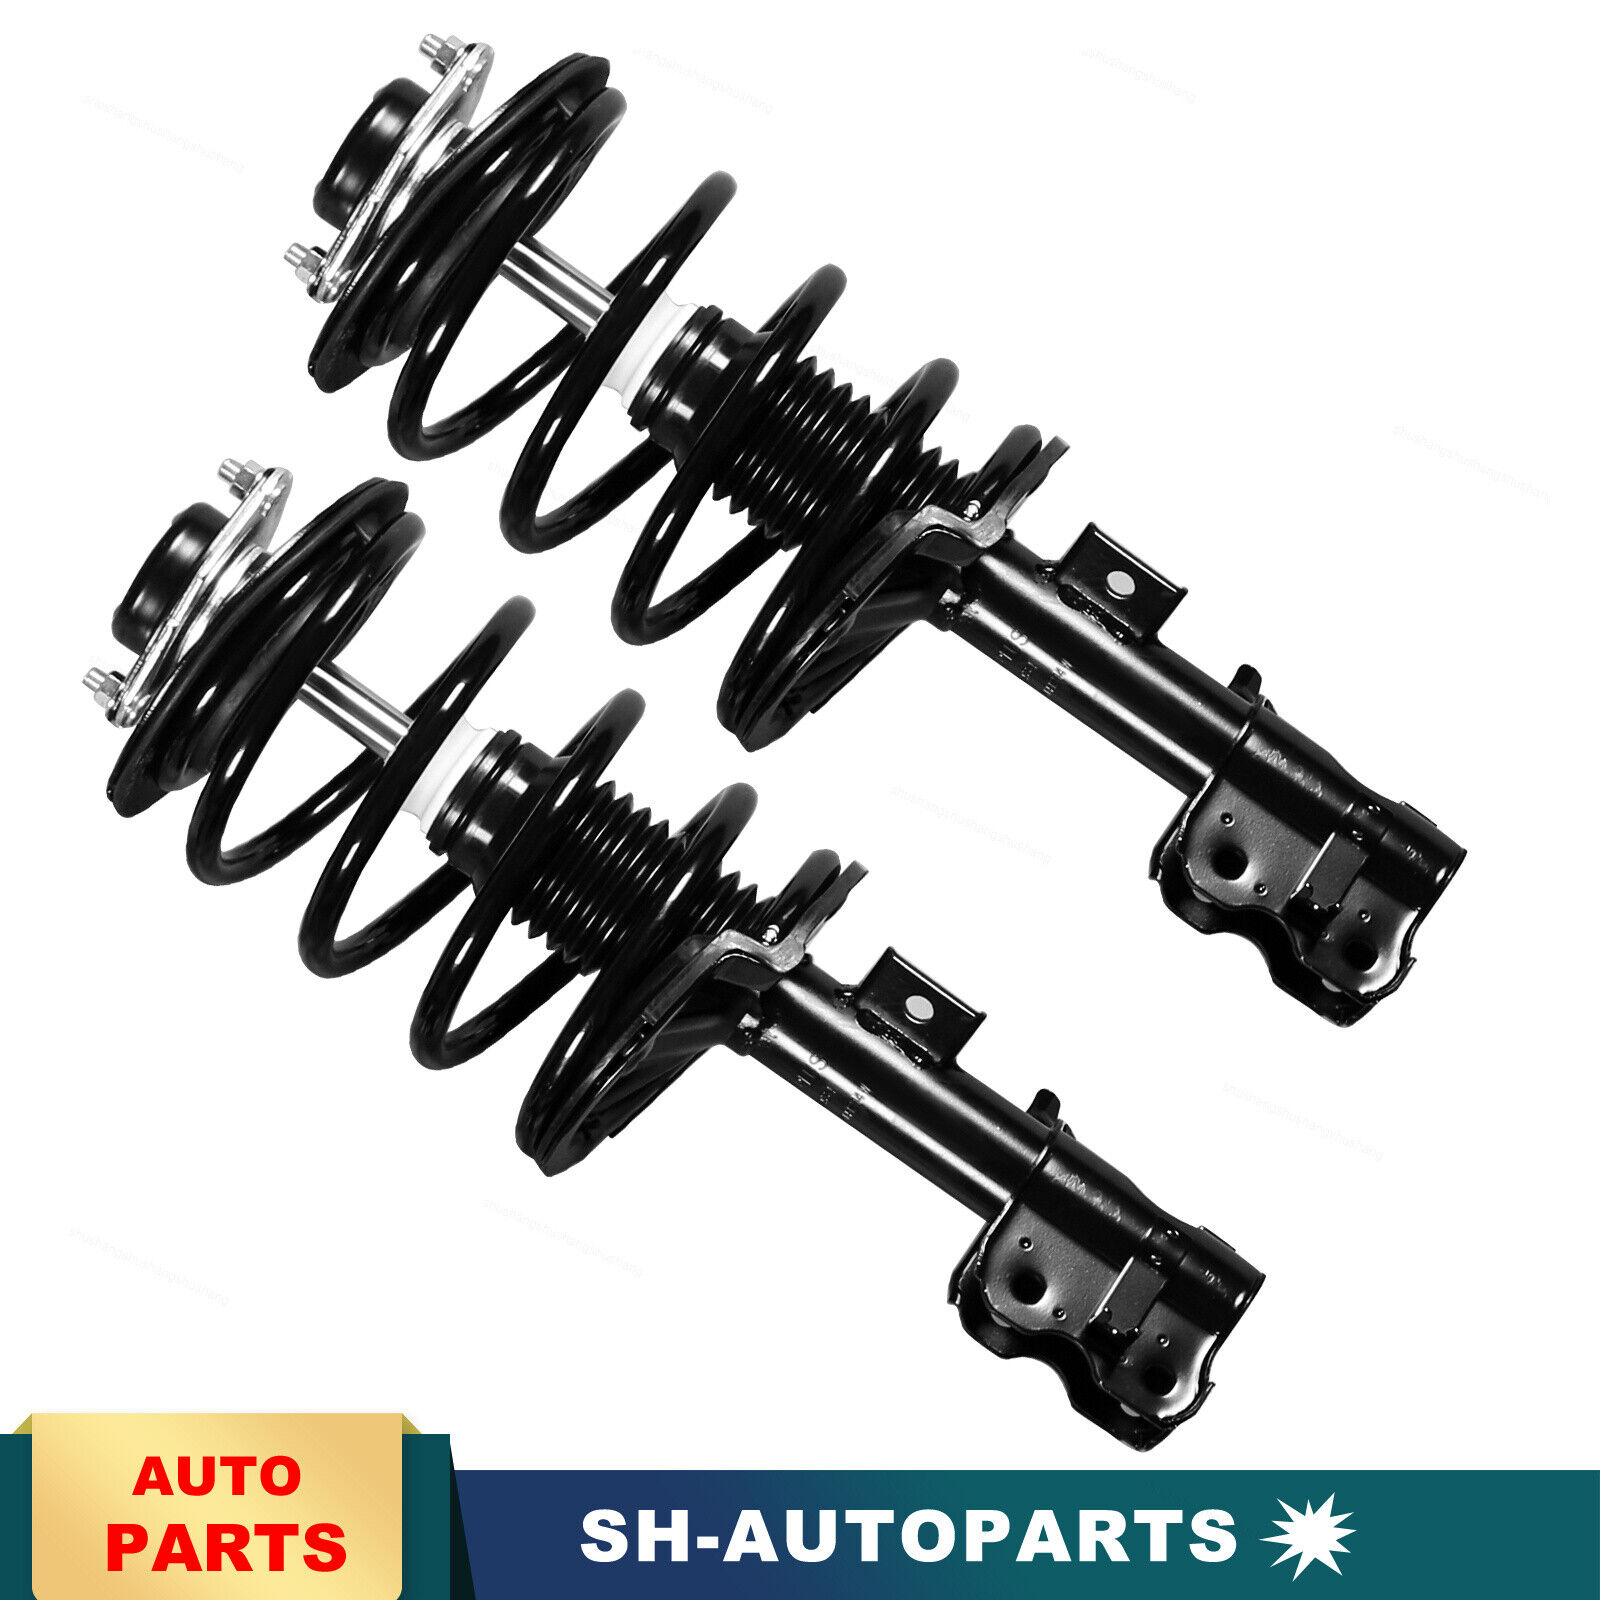 2 Front Shock Struts Assembly Fit for 2002-2006 Nissan Altima 2.5L Only